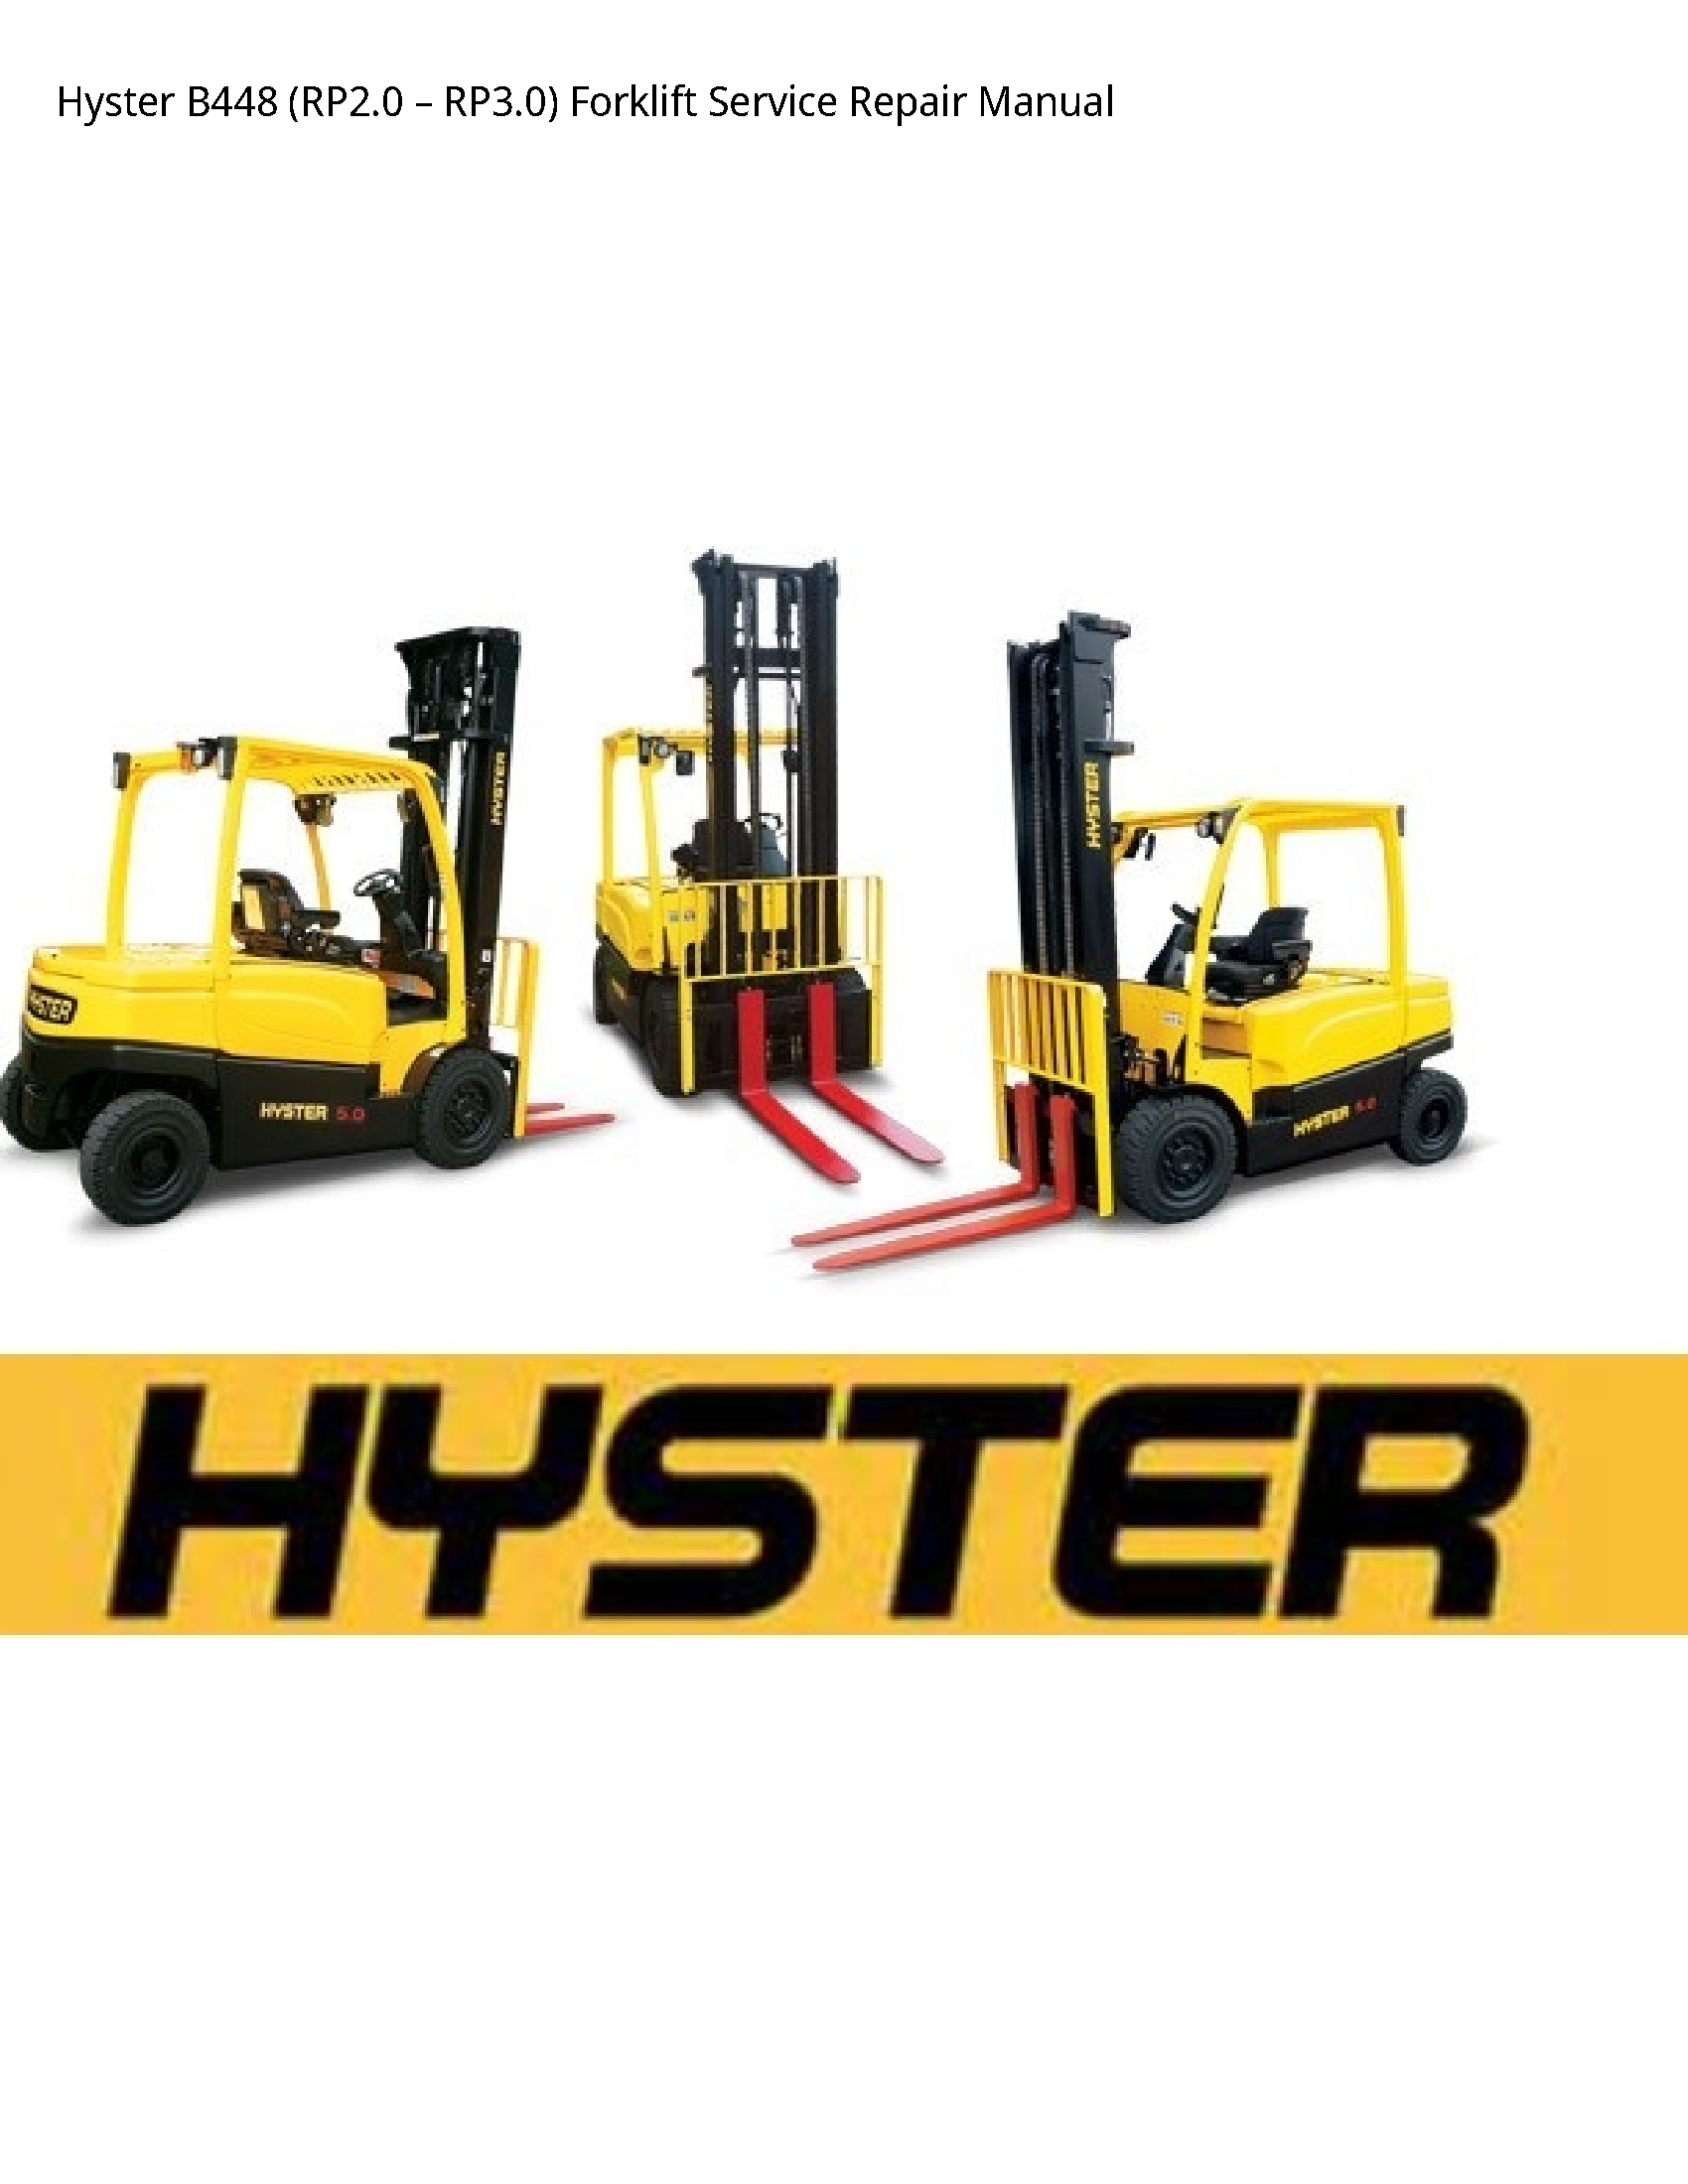 Hyster B448 Forklift manual